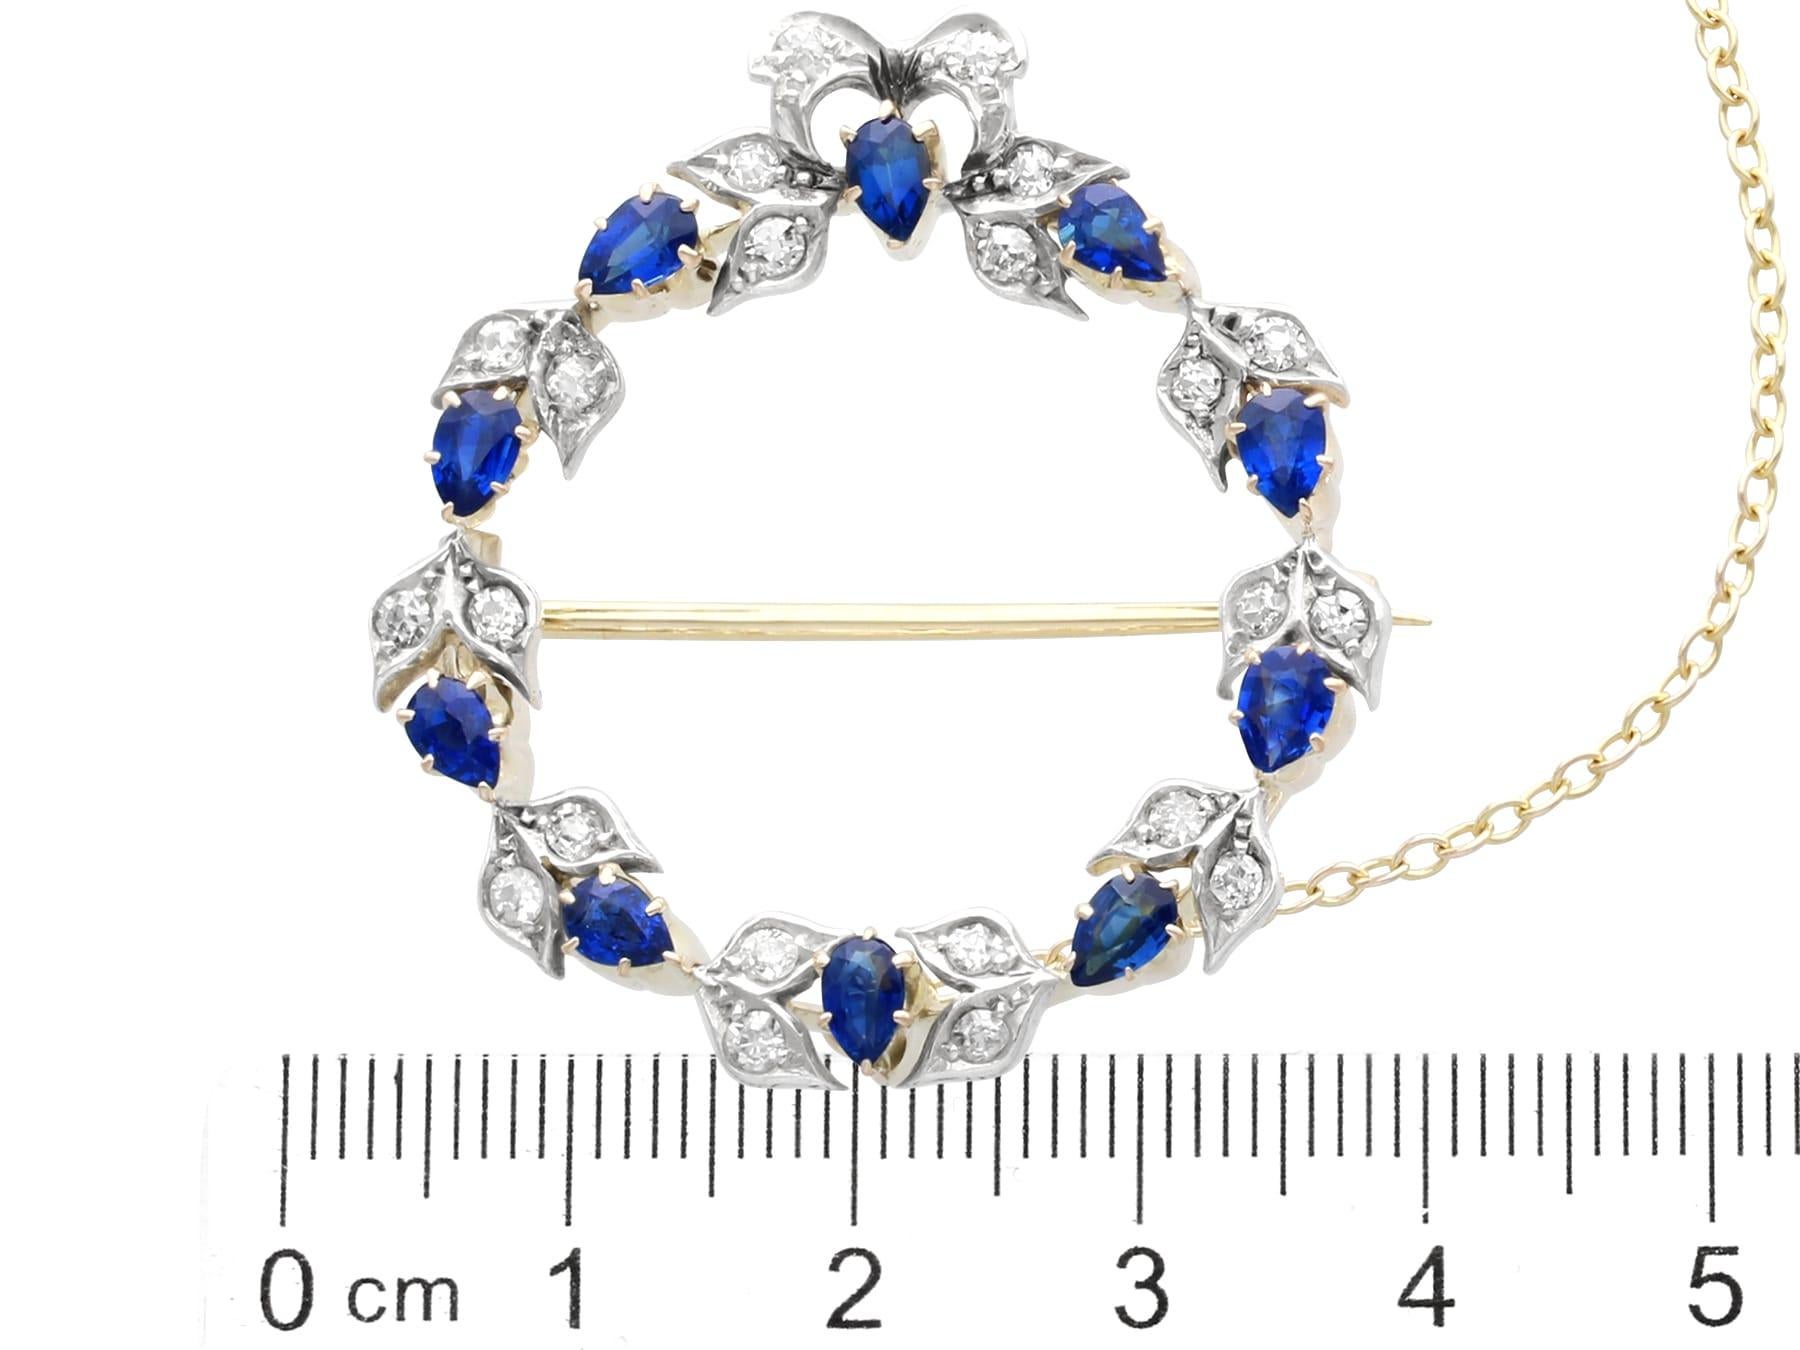 Antique 2.90Ct Sapphire and 0.92Ct Diamond 9k Yellow Gold Brooch Circa 1890 For Sale 2